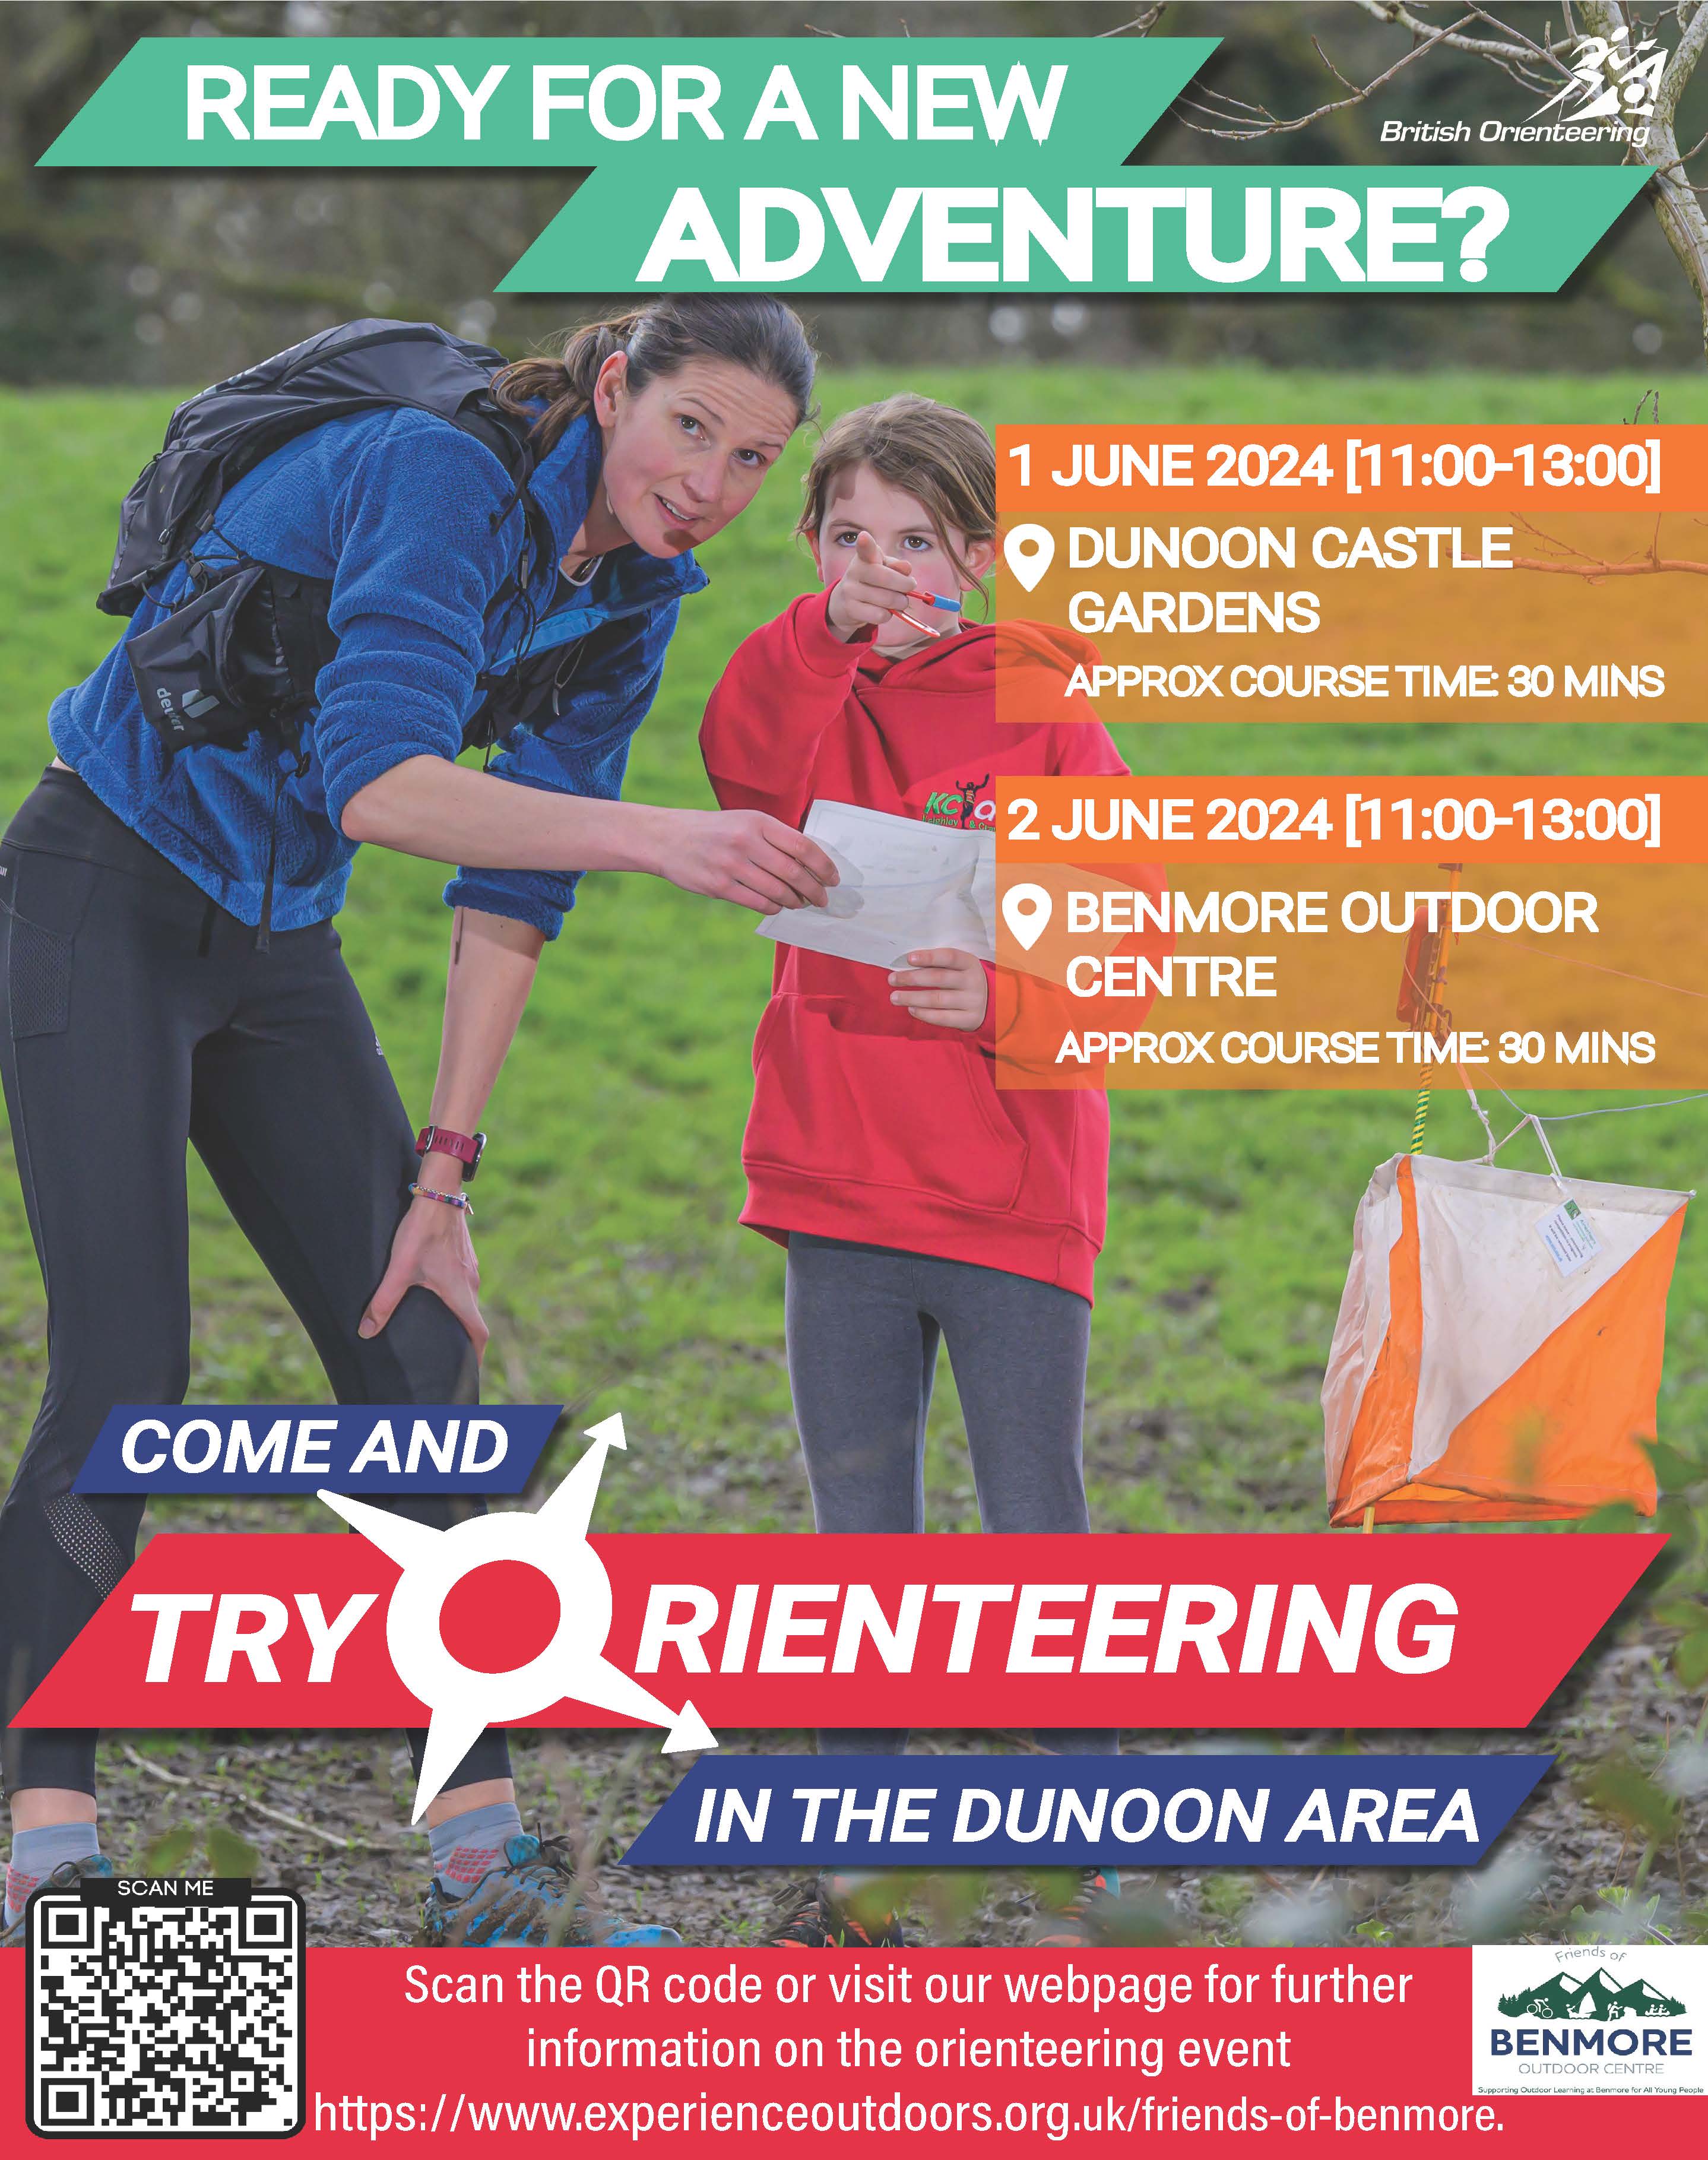 Come and Try It!  Orienteering in Dunoon and at Benmore